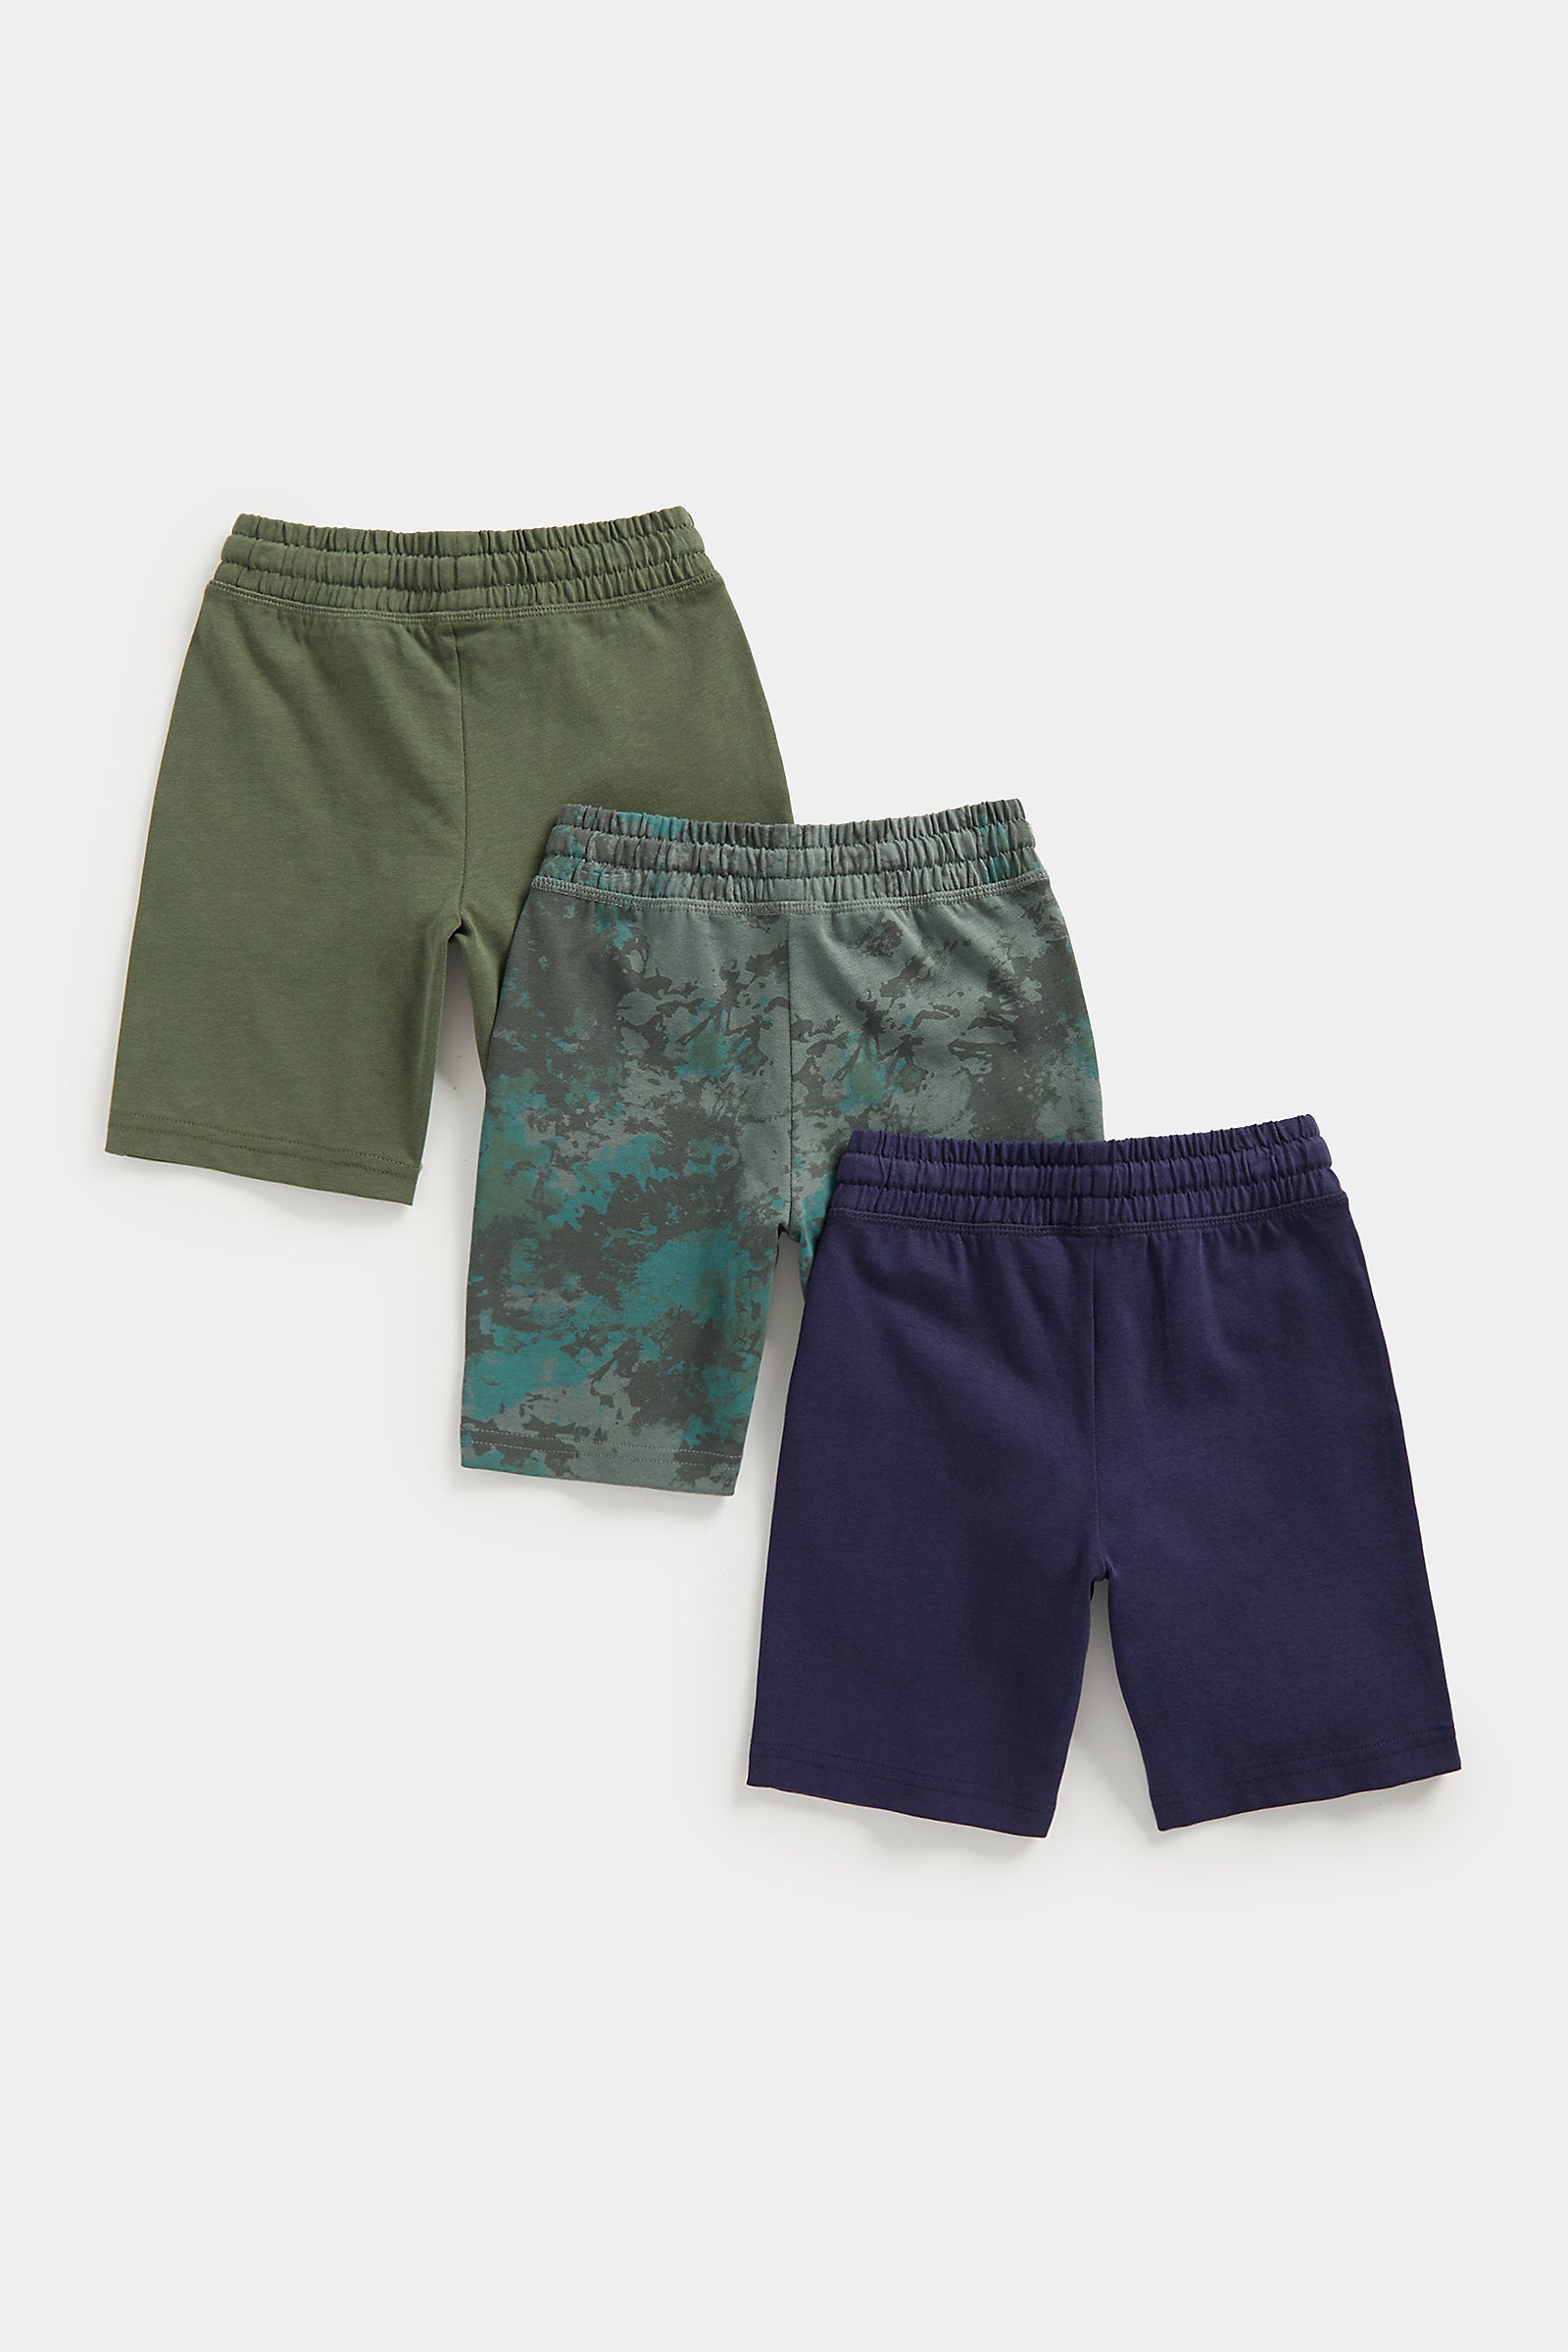 Mothercare Eco Planet Jersey Shorts - 3 Pack